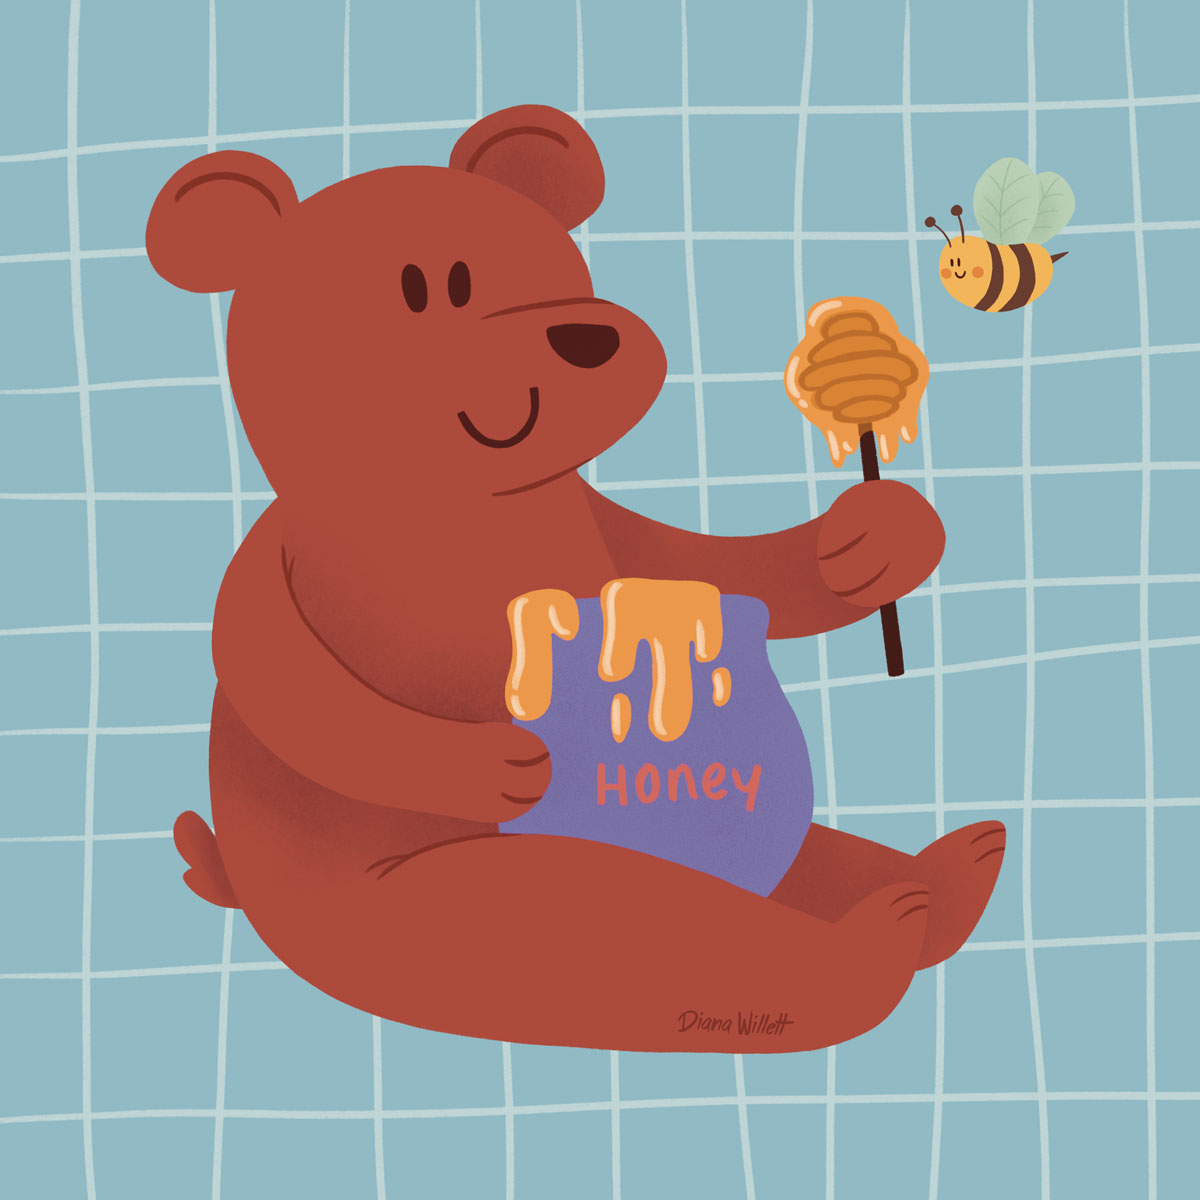 Kidlit Illustration by Diana Willett of bear eating honey out of a jar